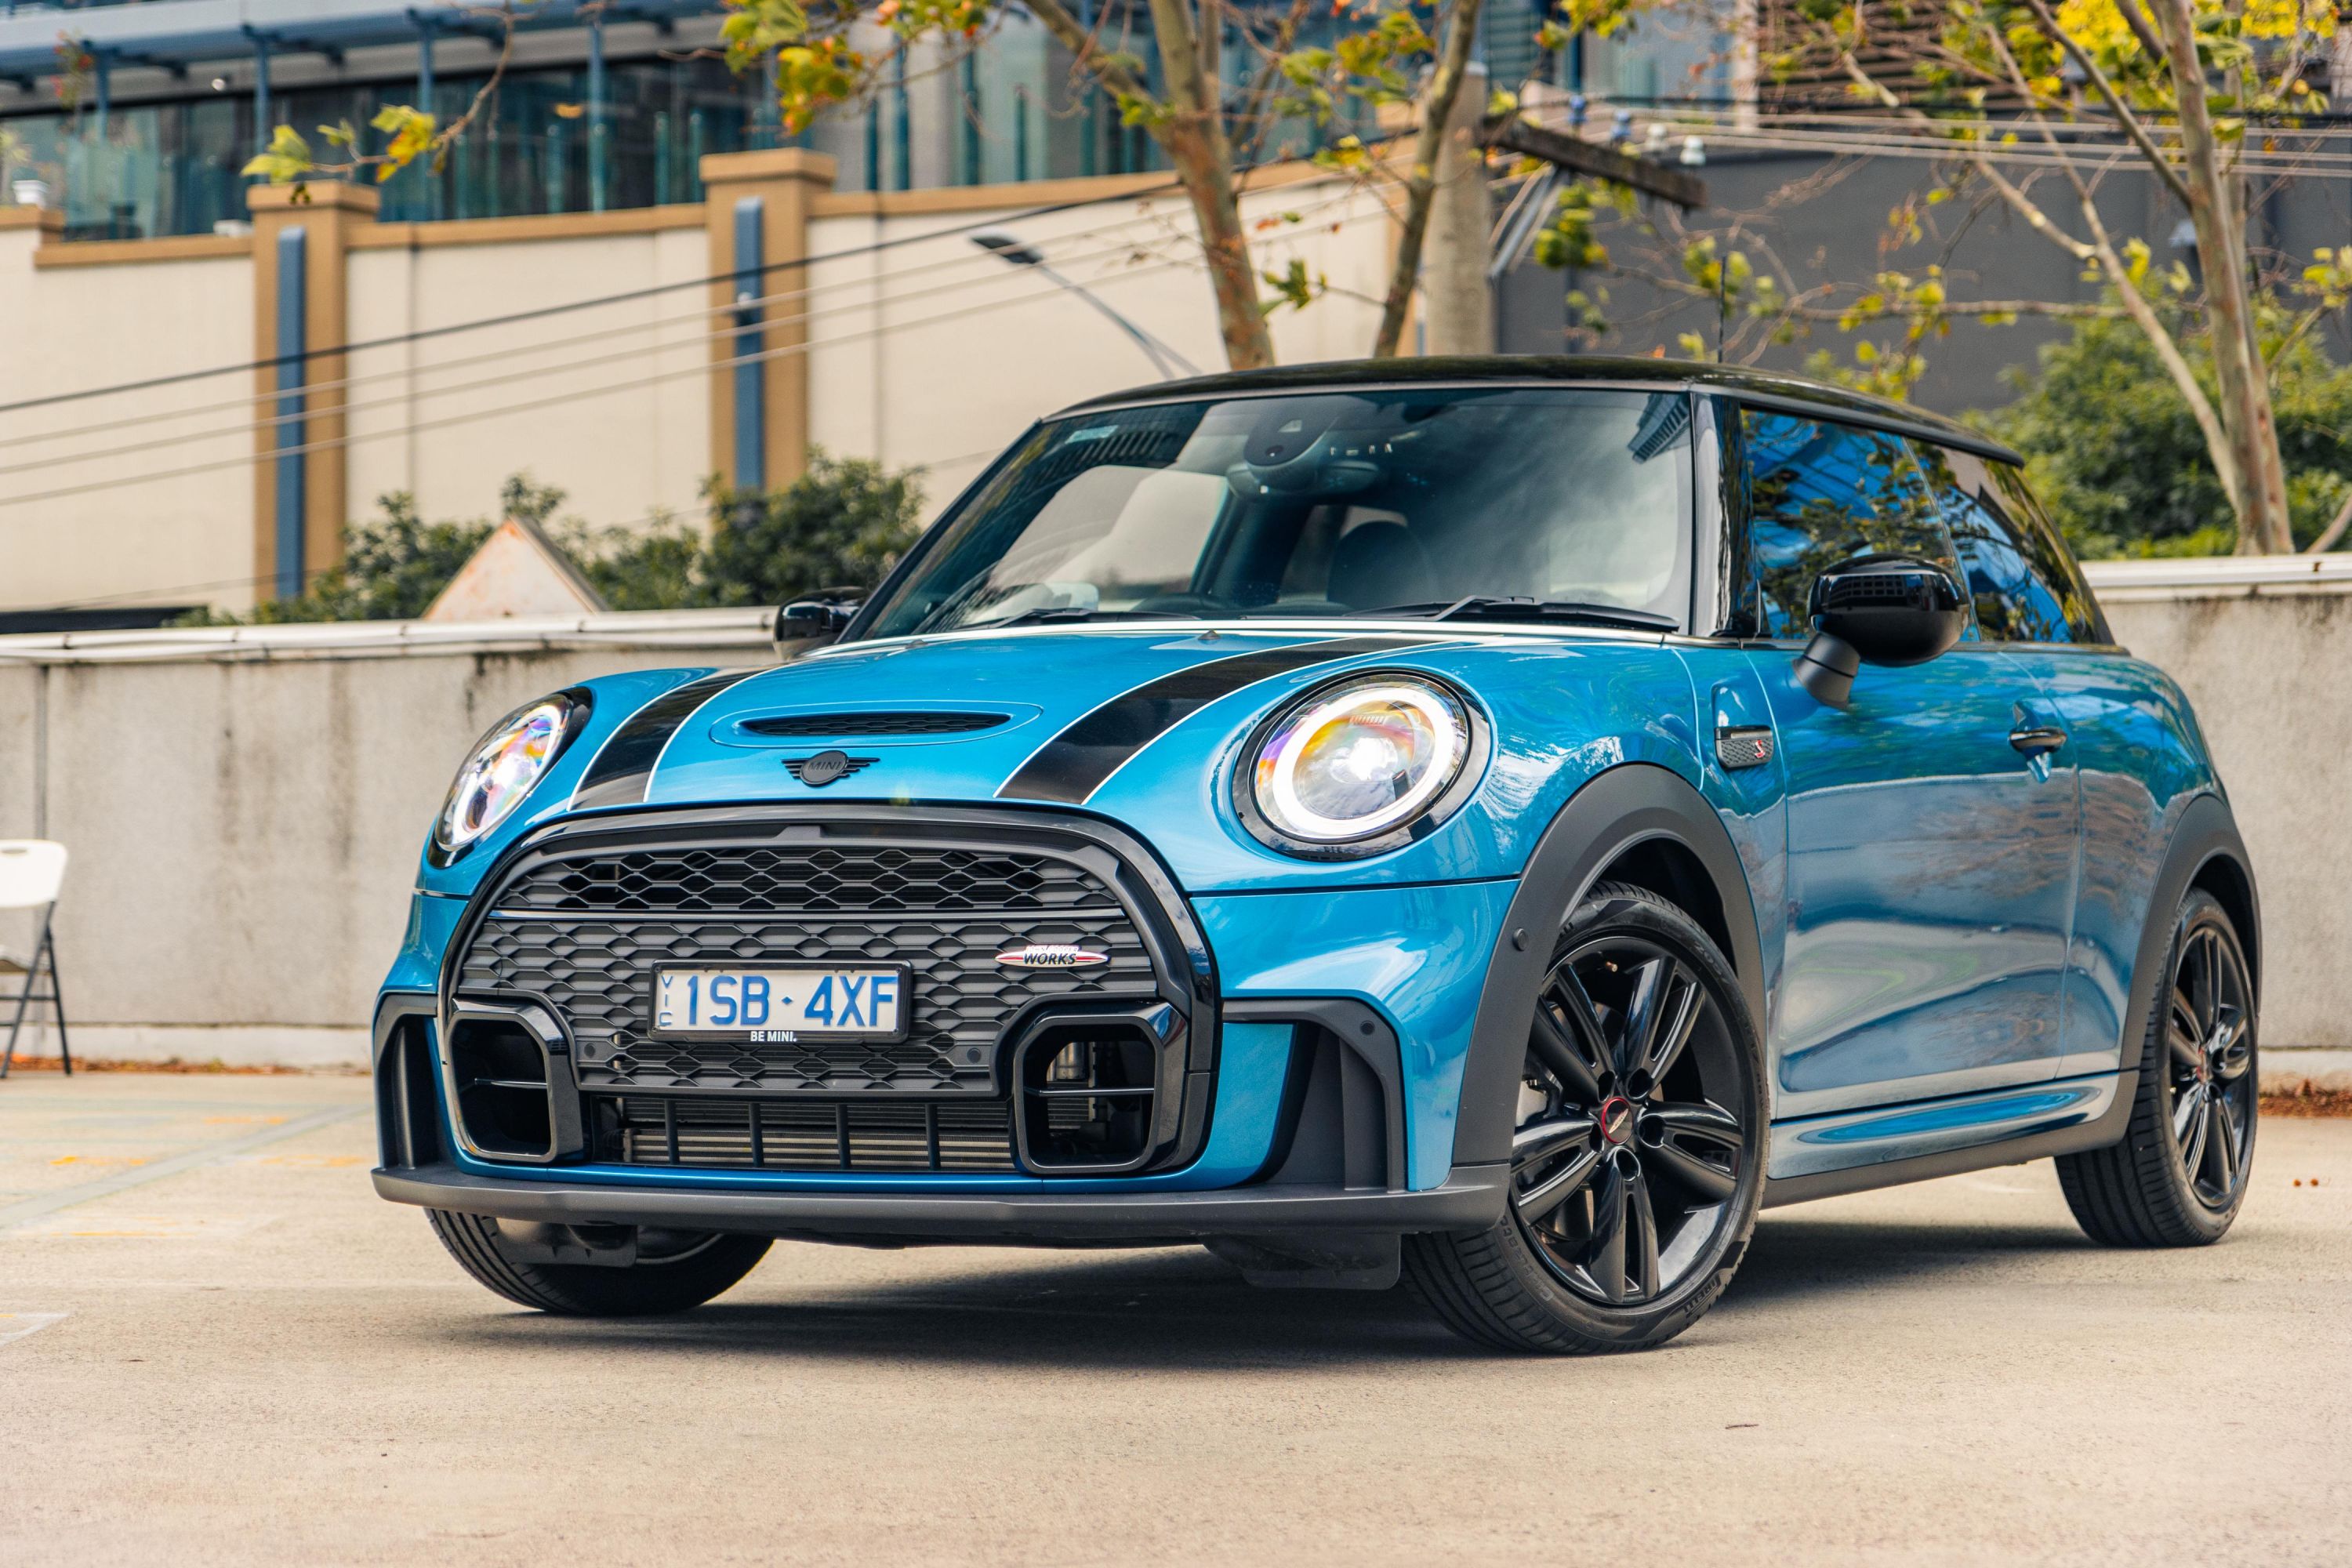 Mini pauses production of six-speed manual cars until 2023 - Drive